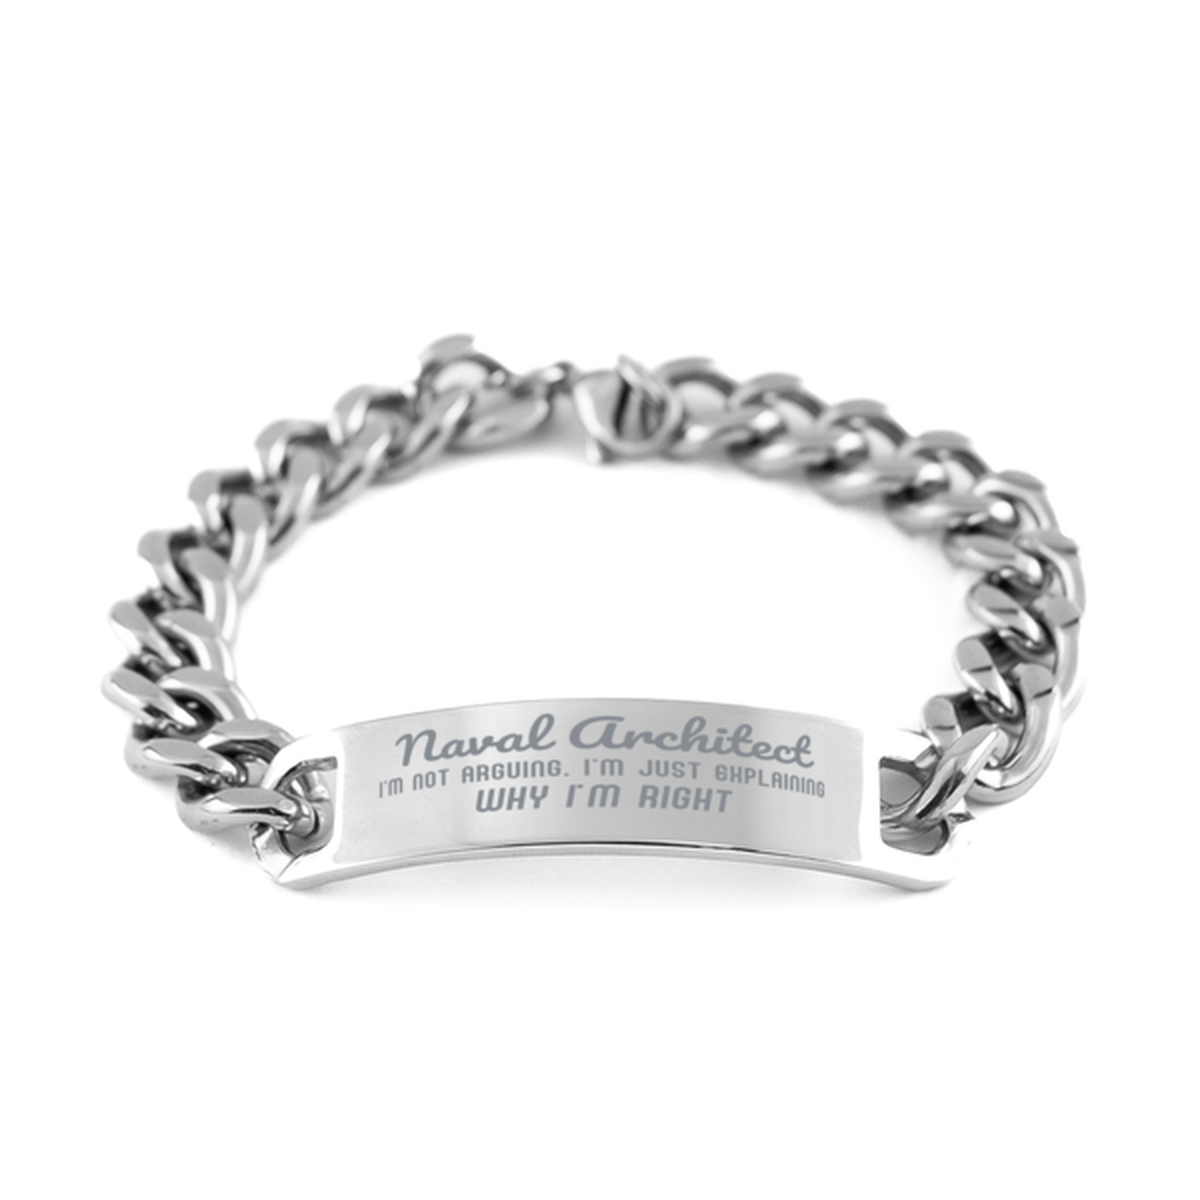 Naval Architect I'm not Arguing. I'm Just Explaining Why I'm RIGHT Cuban Chain Stainless Steel Bracelet, Graduation Birthday Christmas Naval Architect Gifts For Naval Architect Funny Saying Quote Present for Men Women Coworker